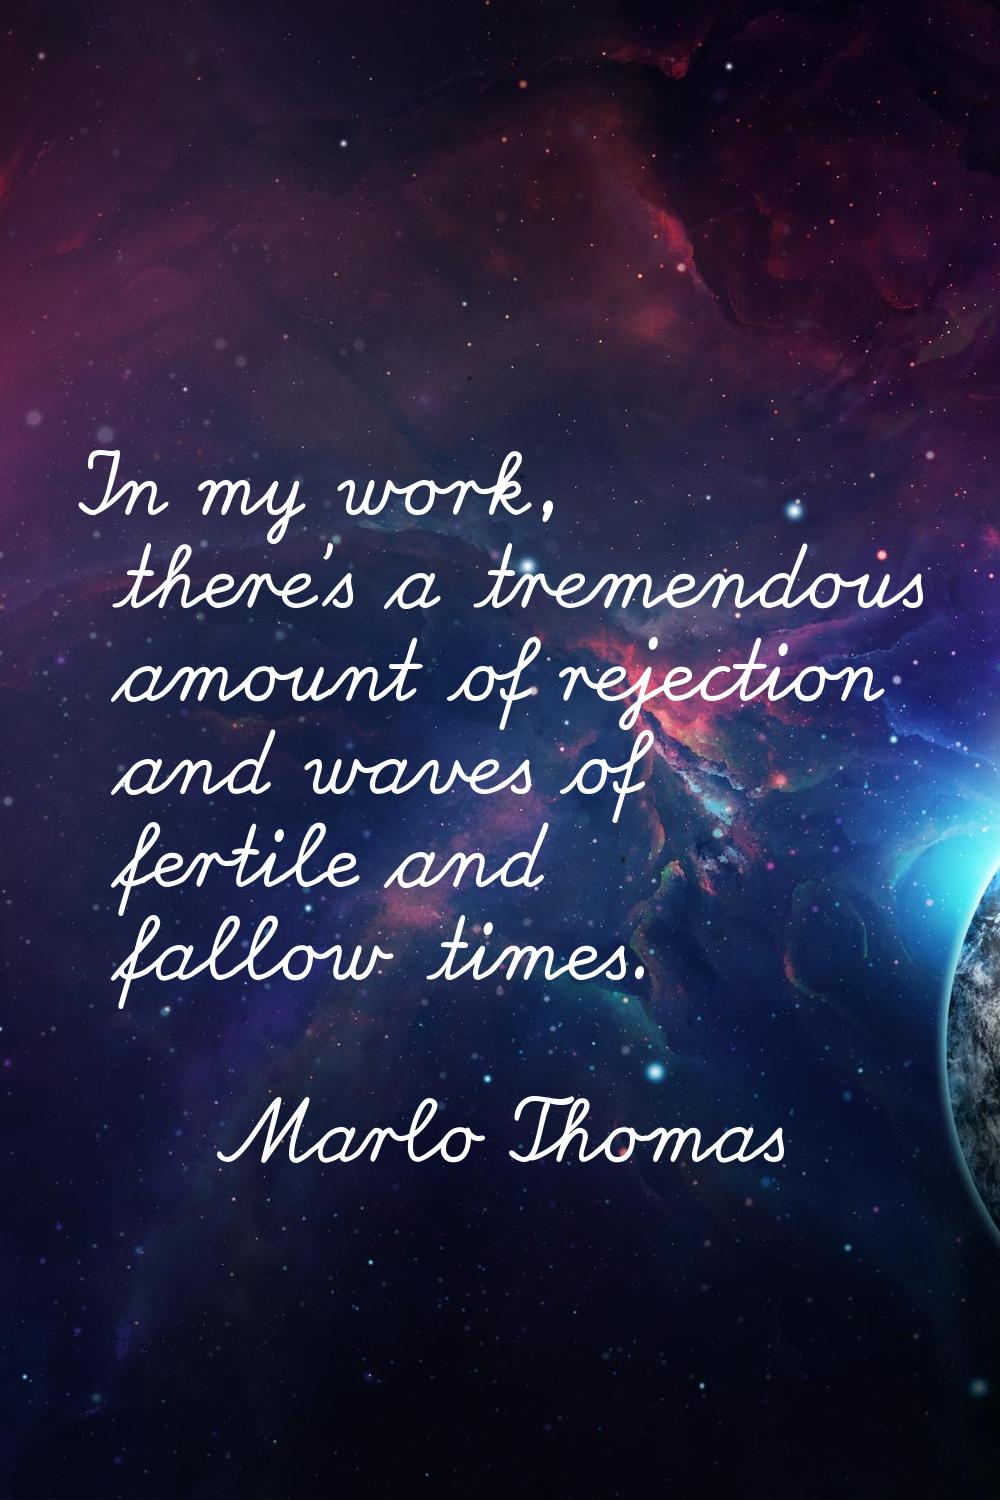 In my work, there's a tremendous amount of rejection and waves of fertile and fallow times.